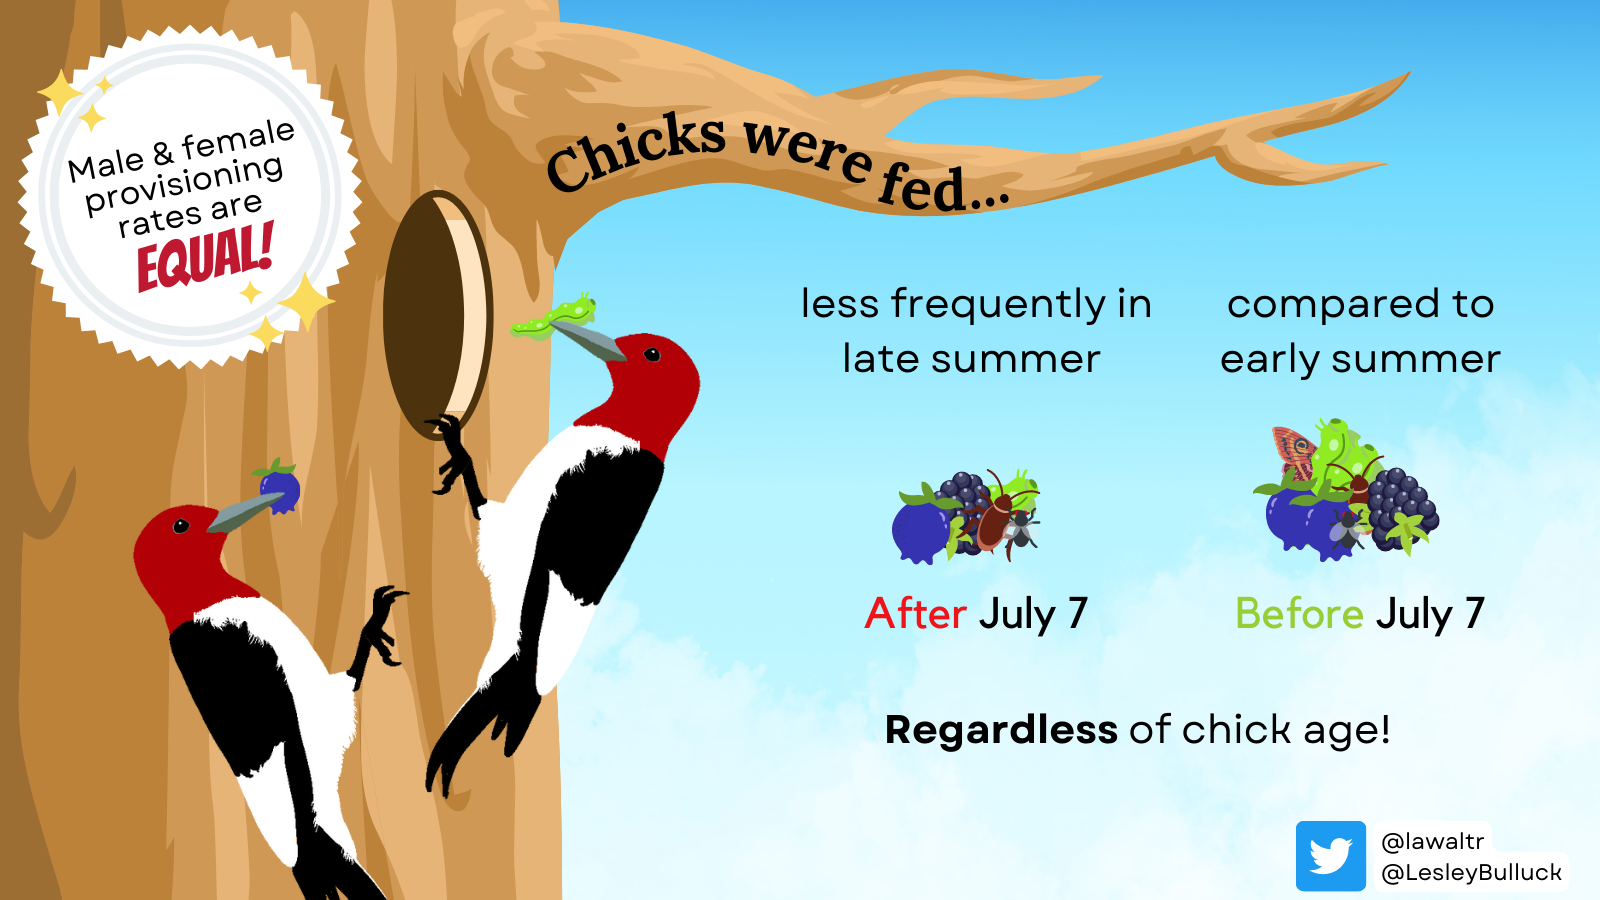 Male and female provisioning rates are equal. Red-headed Woodpeckers fed their chicks less frequently in late summer, after July 7, regardless of chick age.